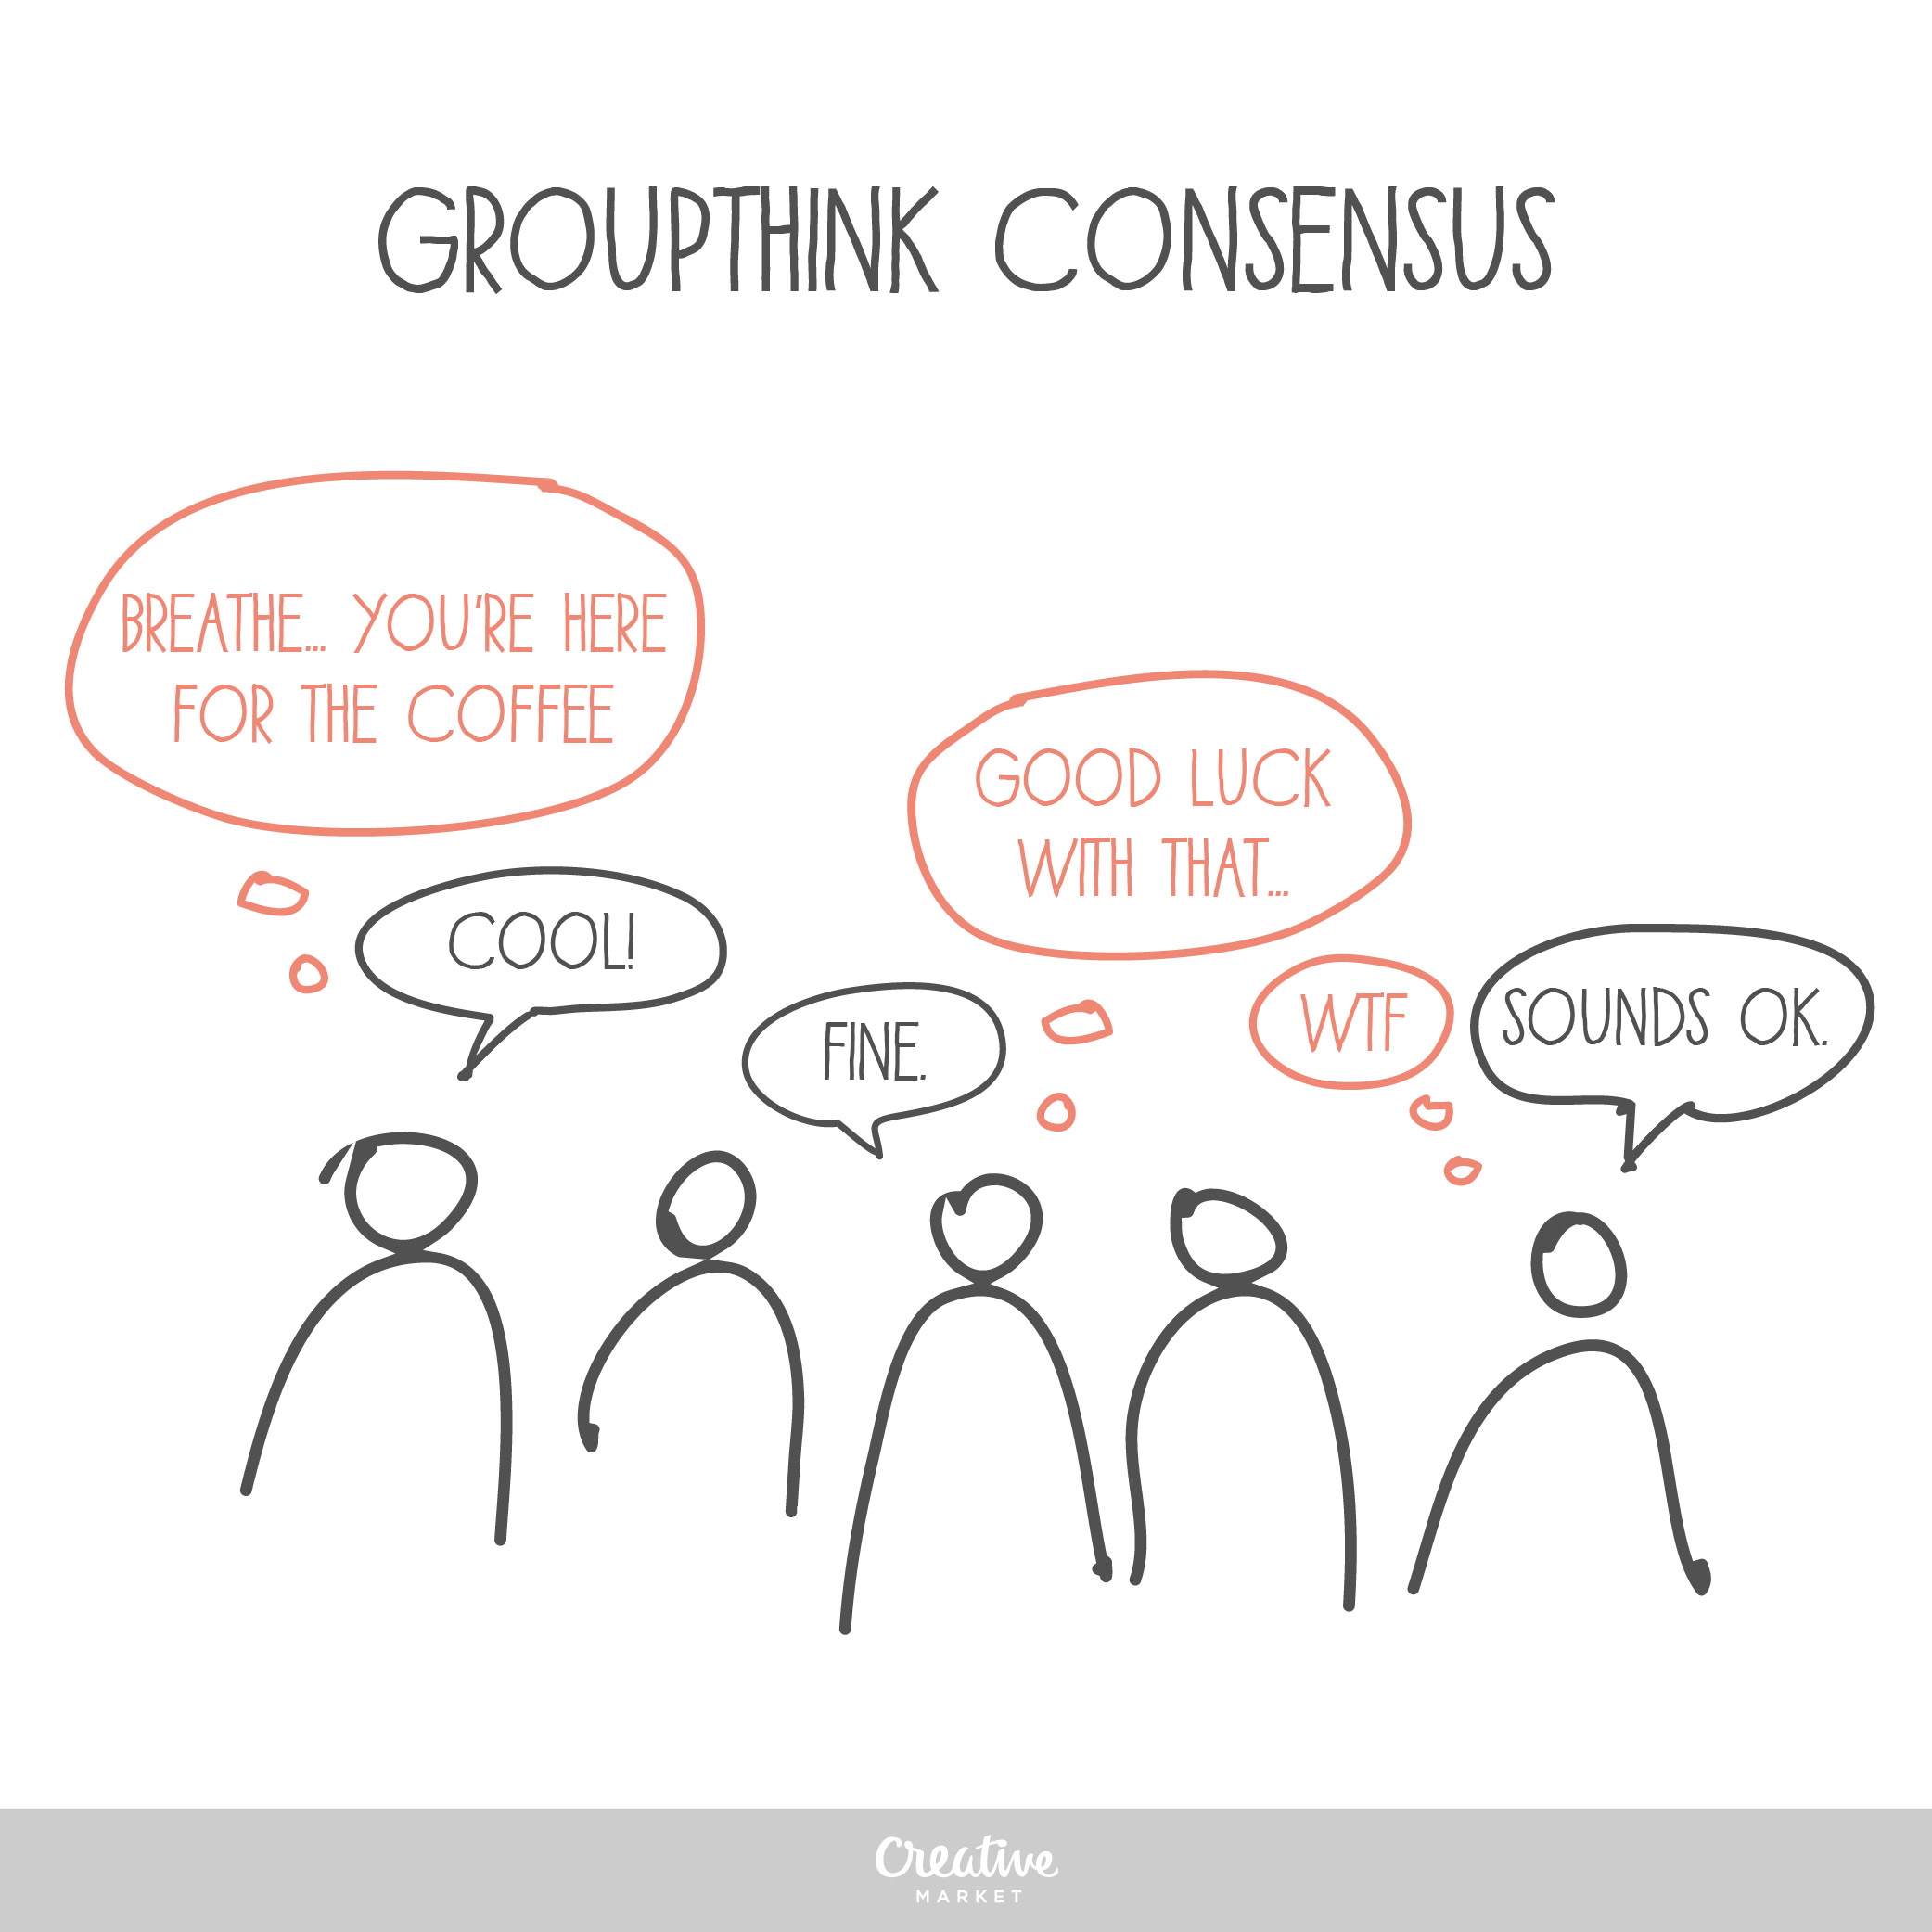 Meeting, brainstorming, or groupthink consensus.